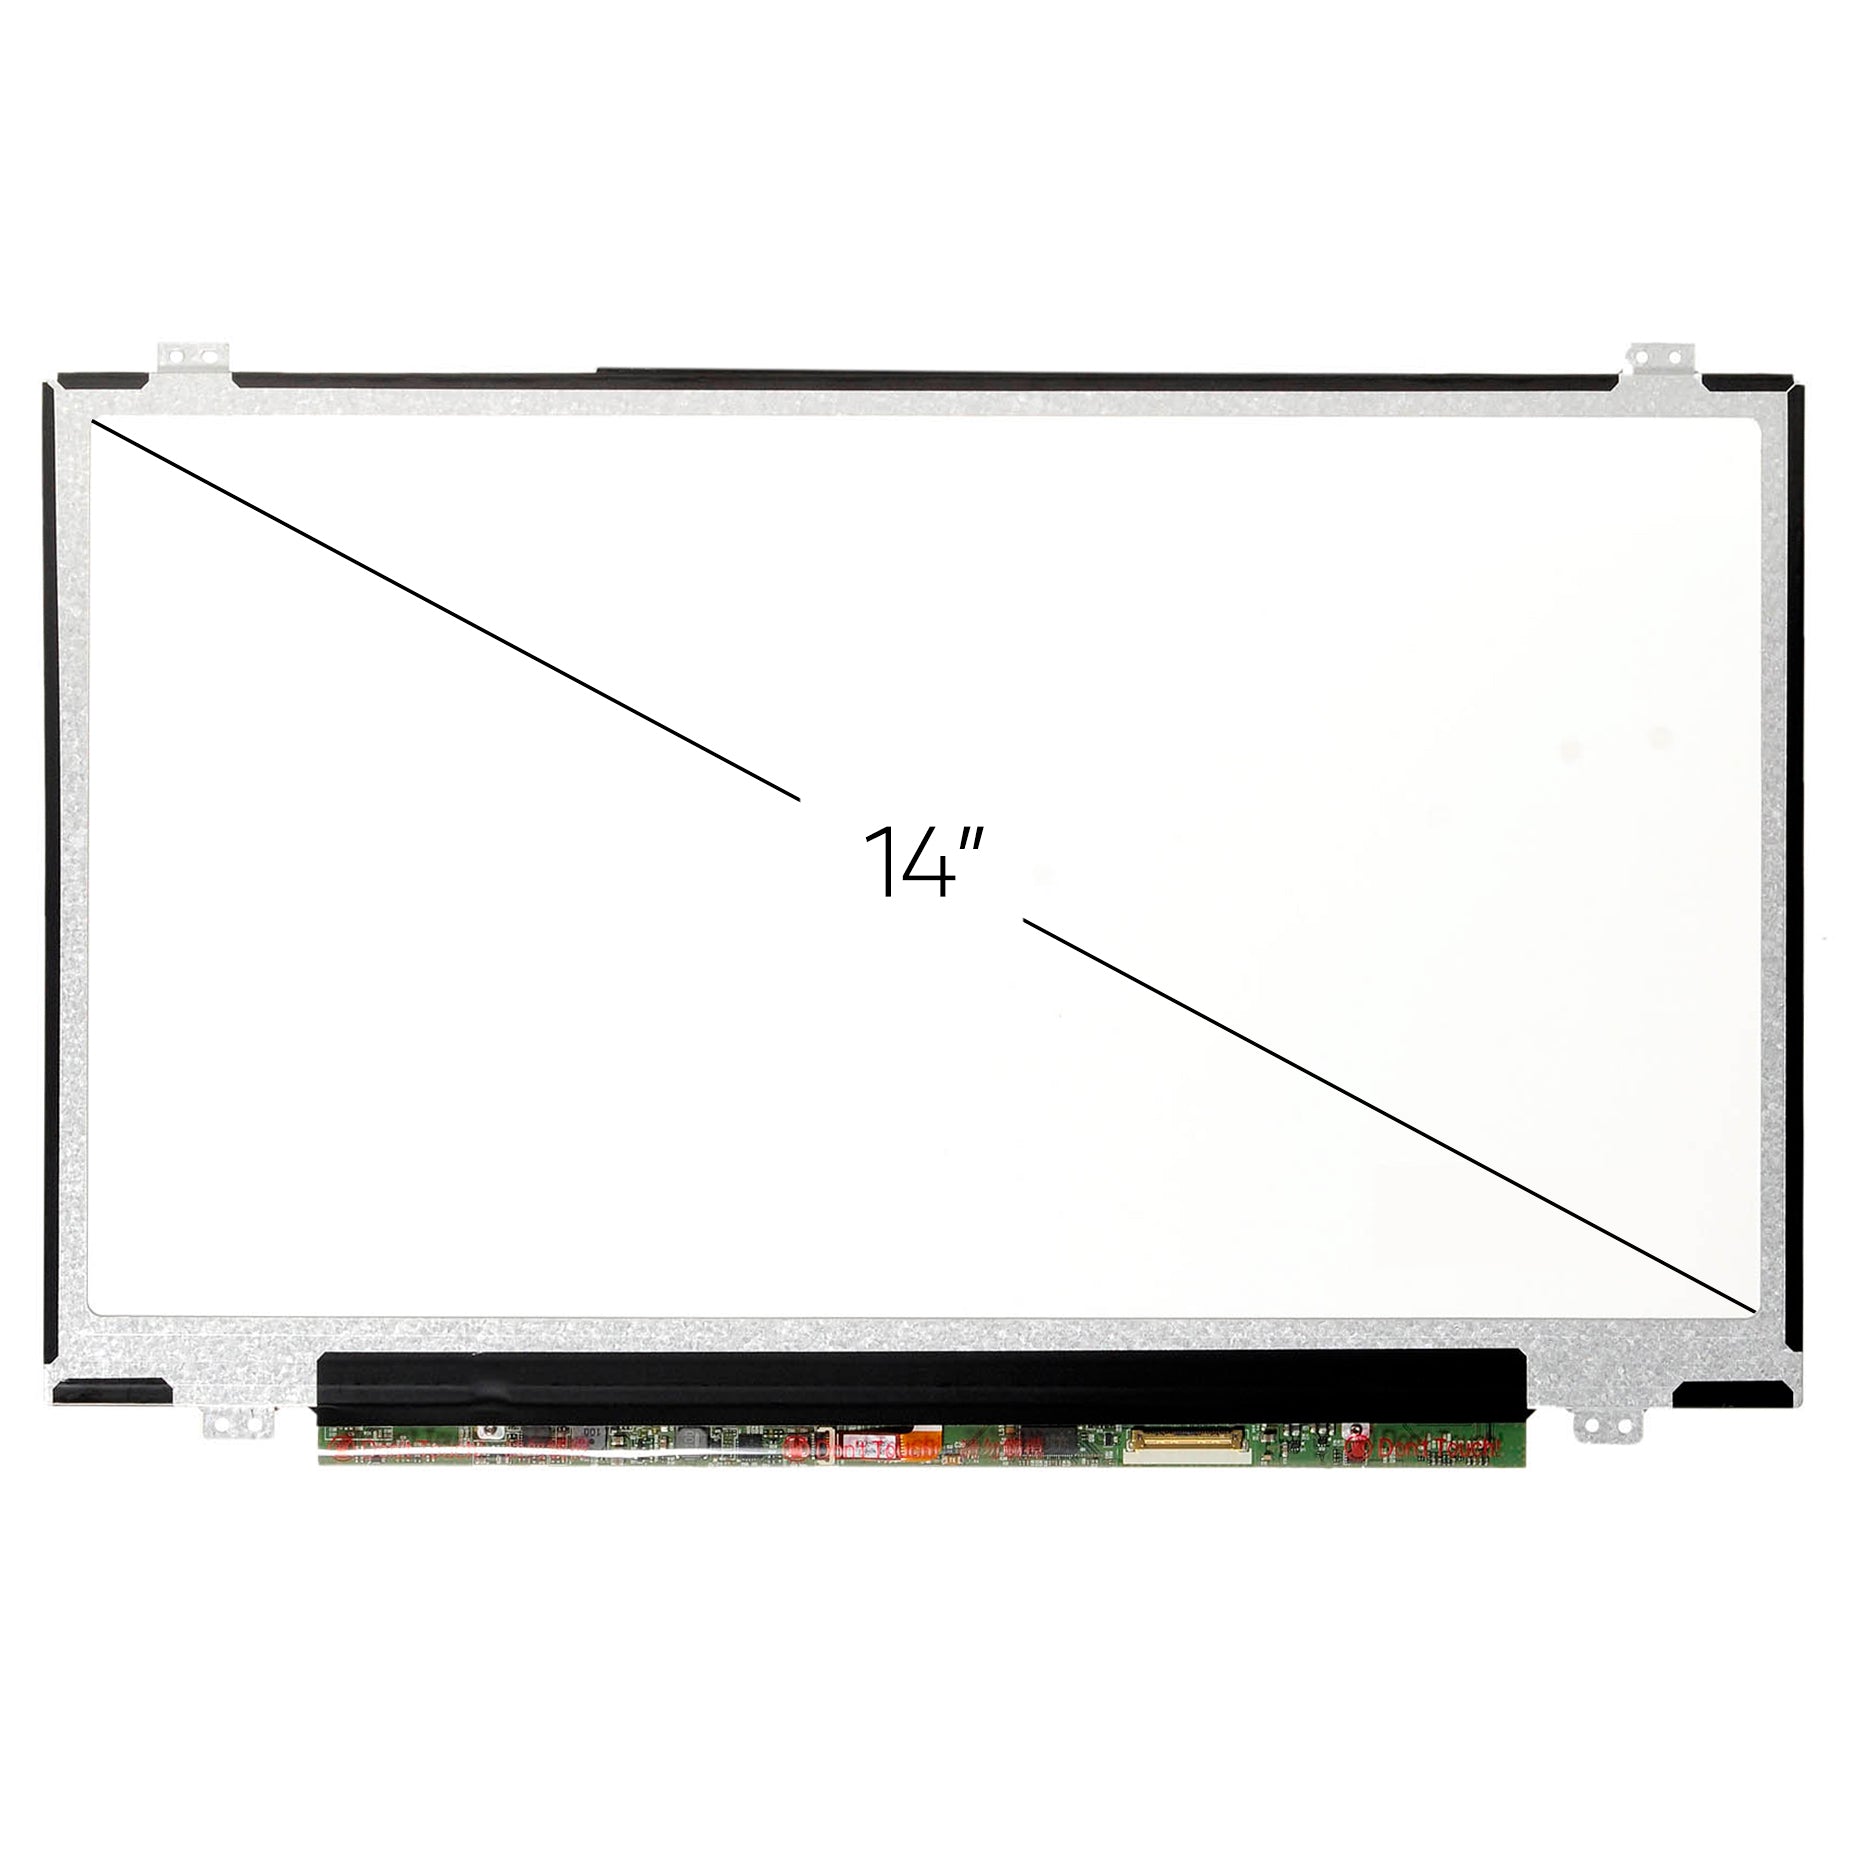 Screen Replacement for Lenovo P/N SD10M67968 FHD 1920x1080 IPS Matte LCD LED Display